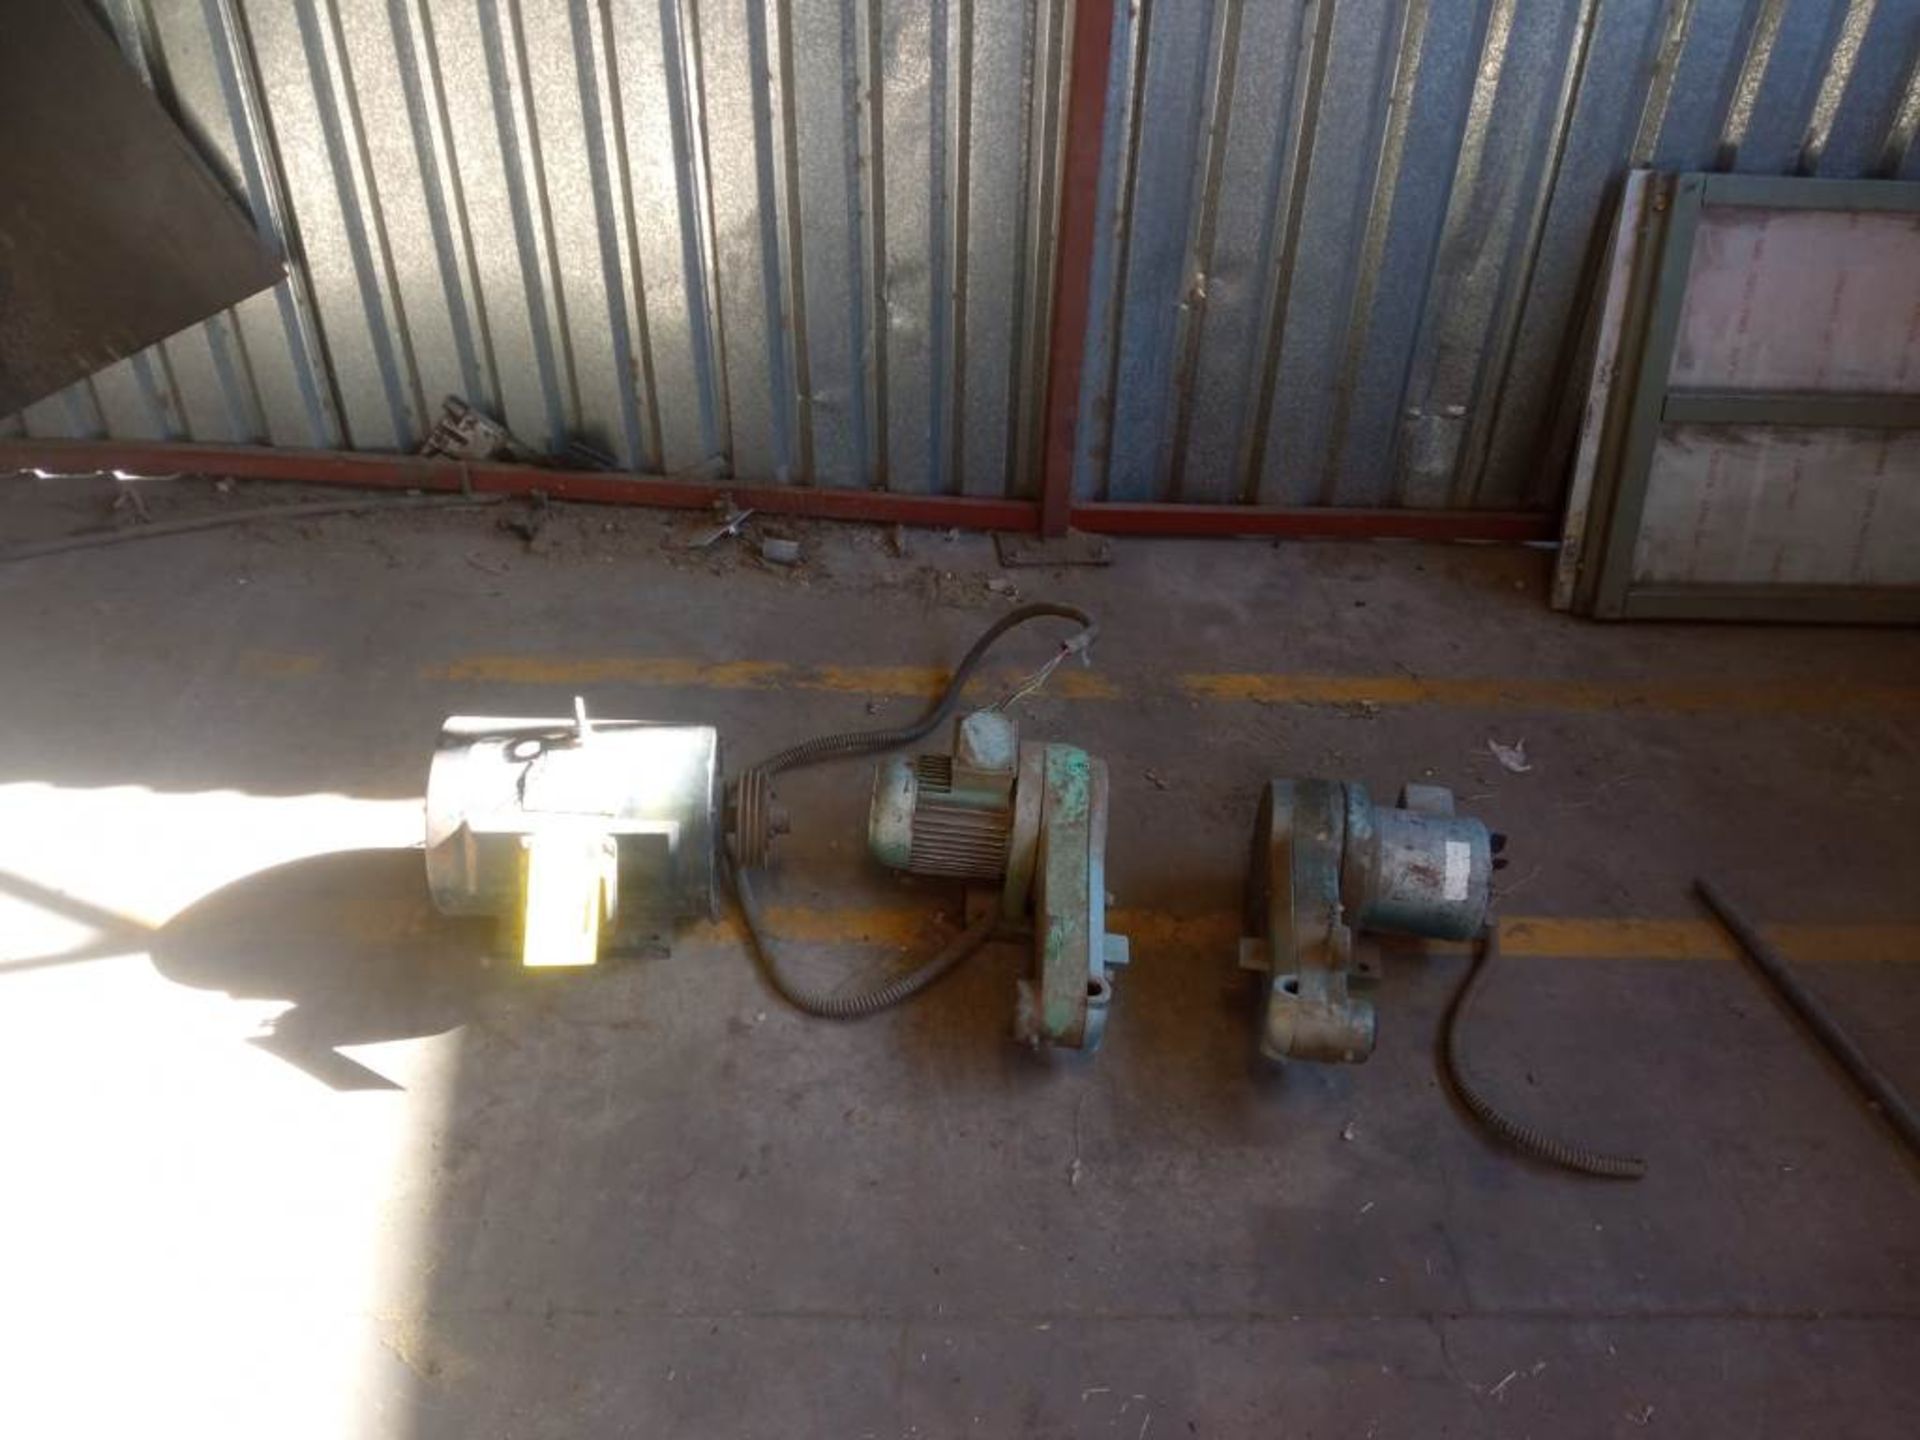 Lot of 3 pieces contains: 1 Leeson electric motor 10 hp, 208-230/460V; 1 Leroy electric motor 1.5 h